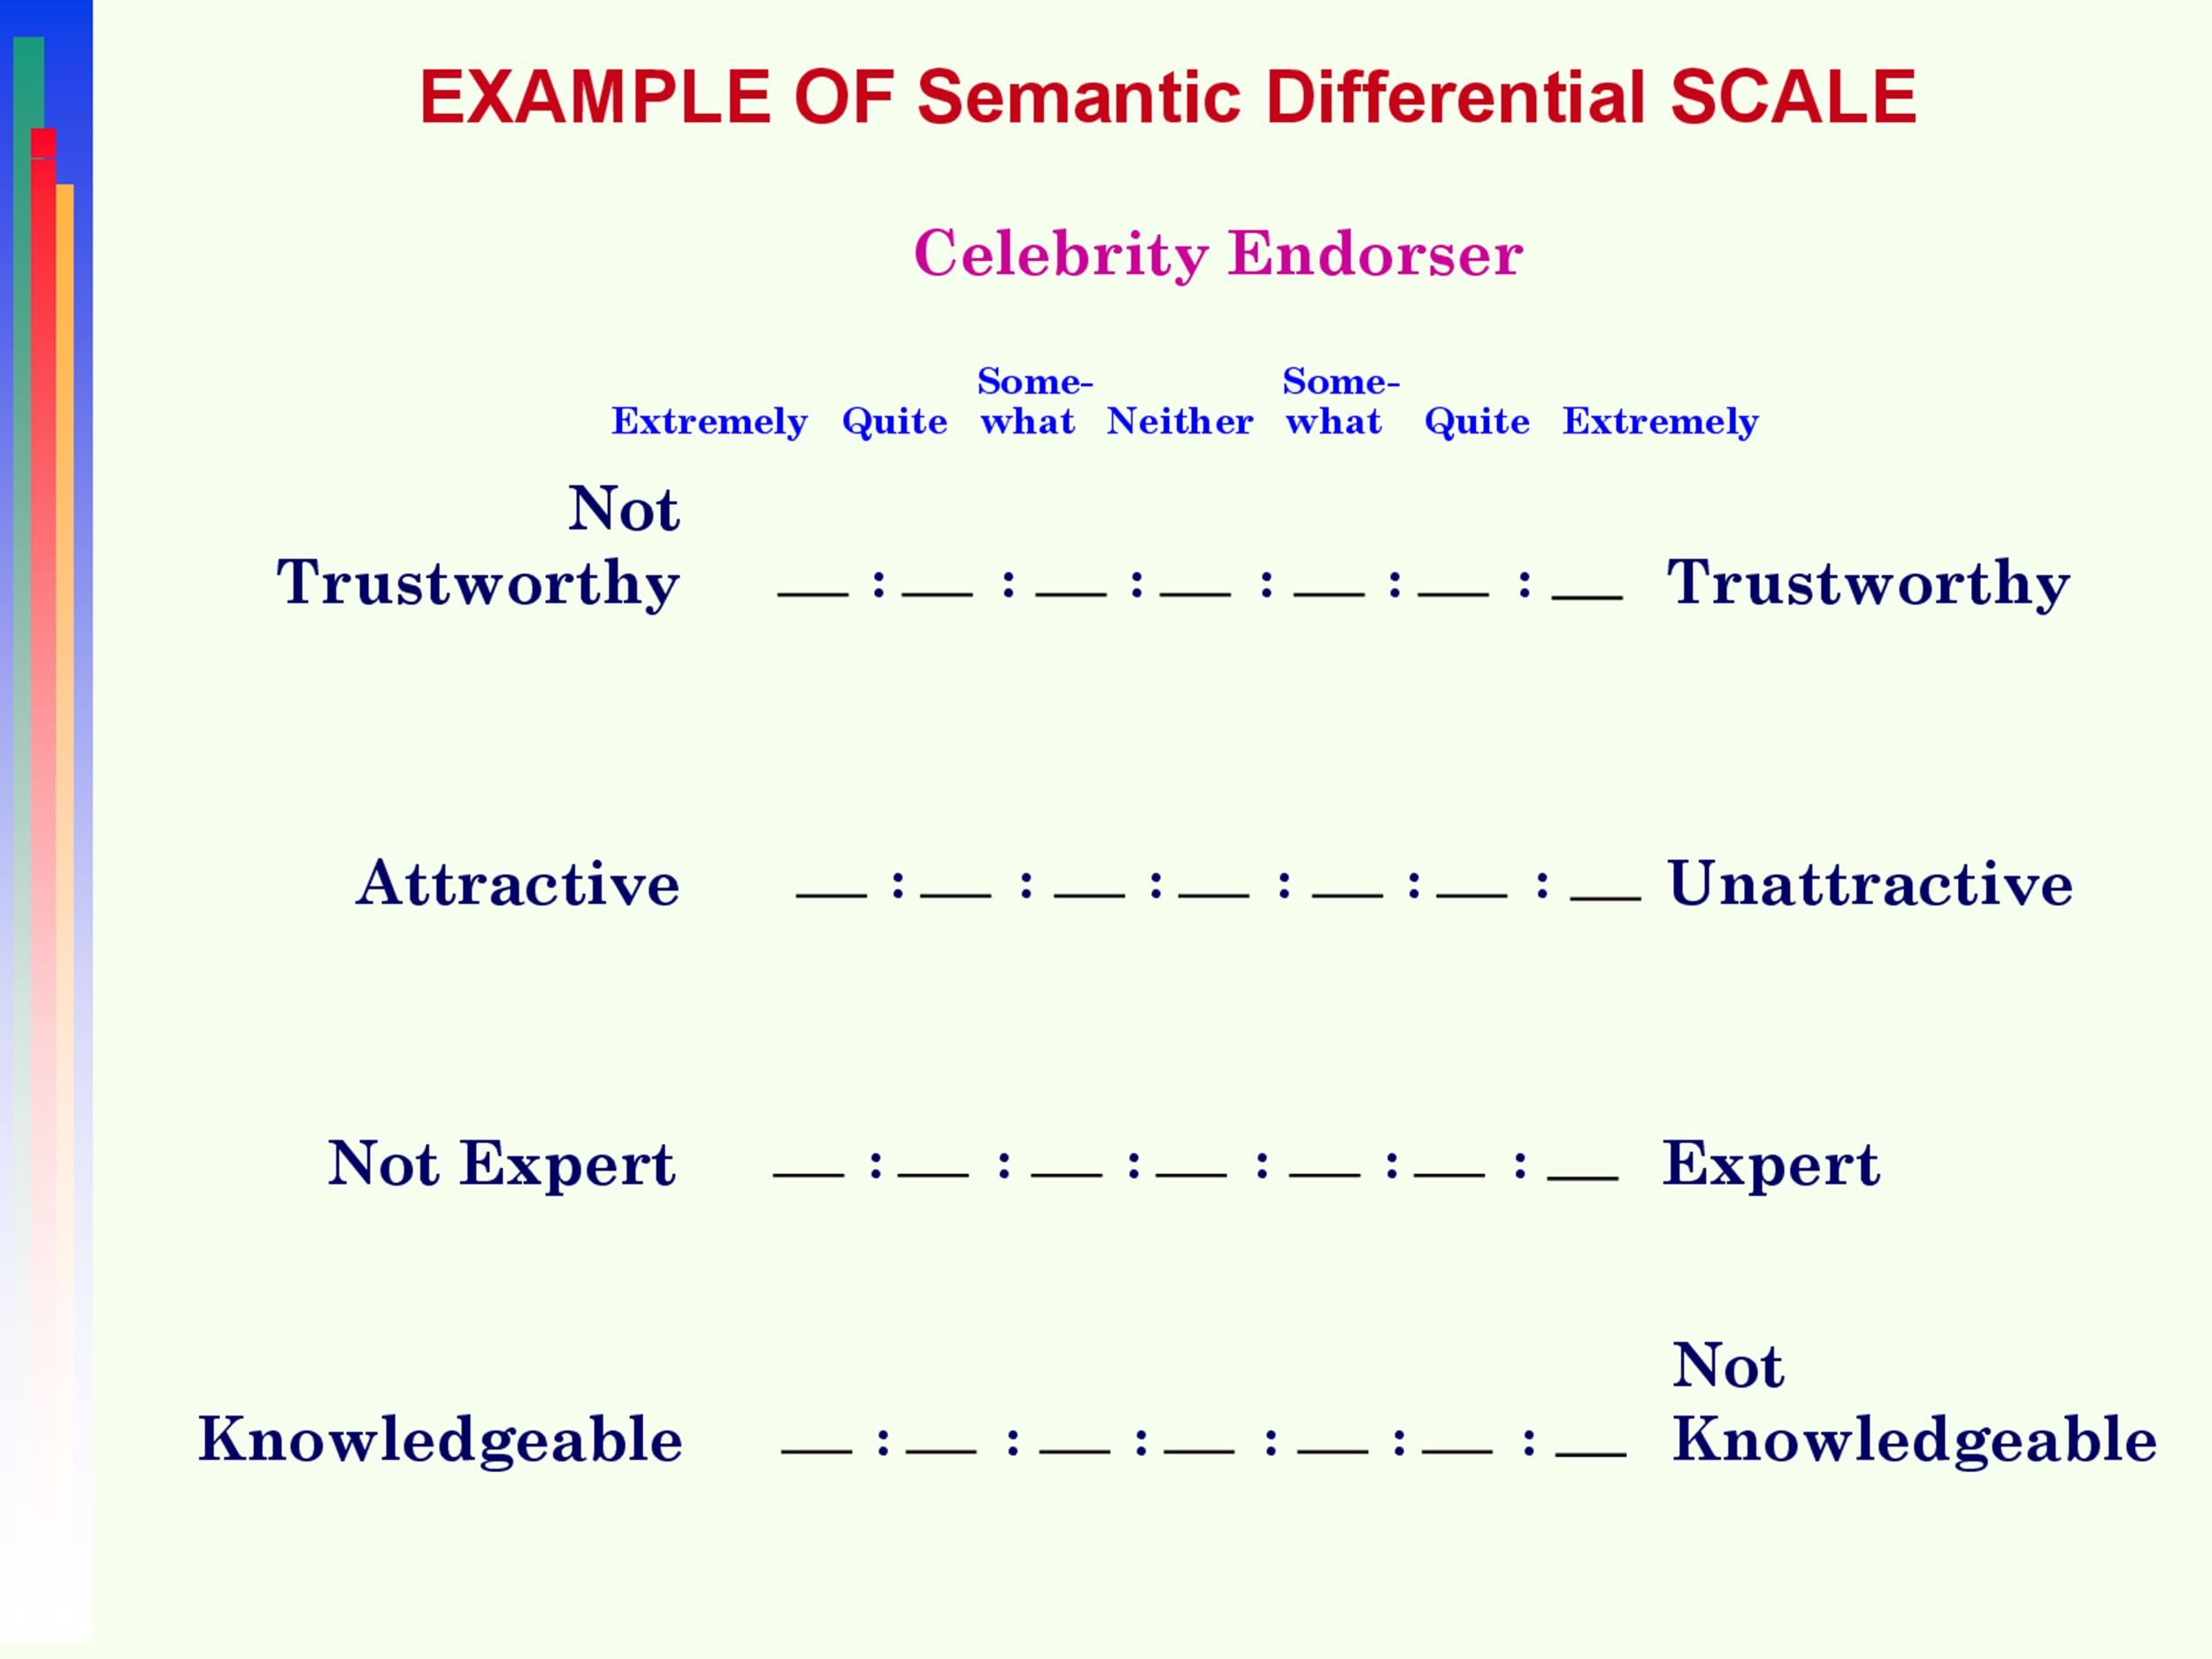 30 Free Likert Scale Templates Examples ᐅ TemplateLab